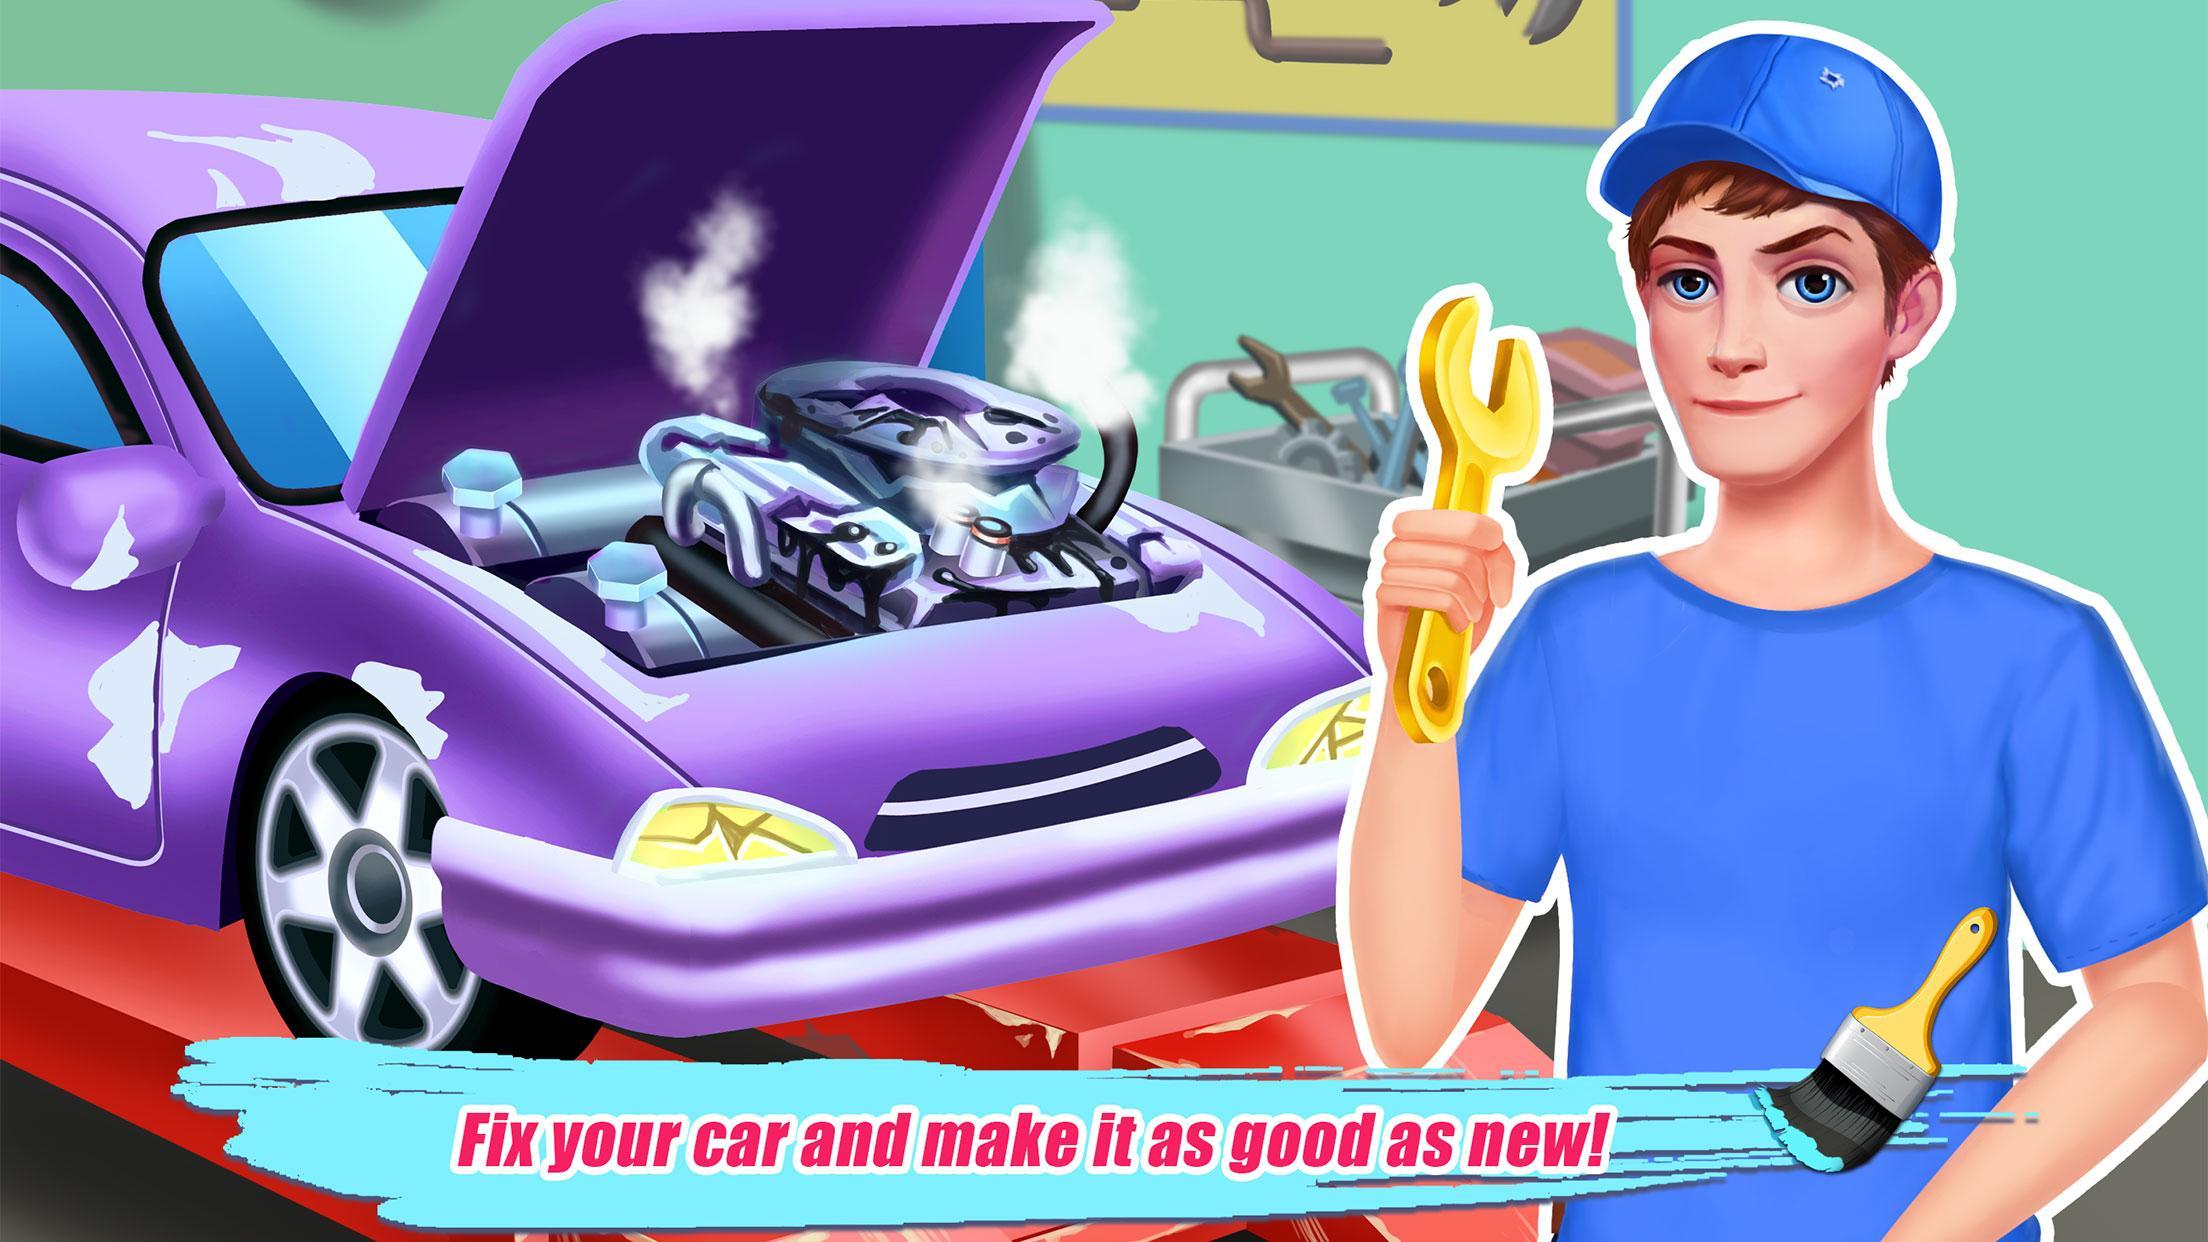 Car Salon - Free Kids Fix, Clean and Repair Games for Android - APK Download